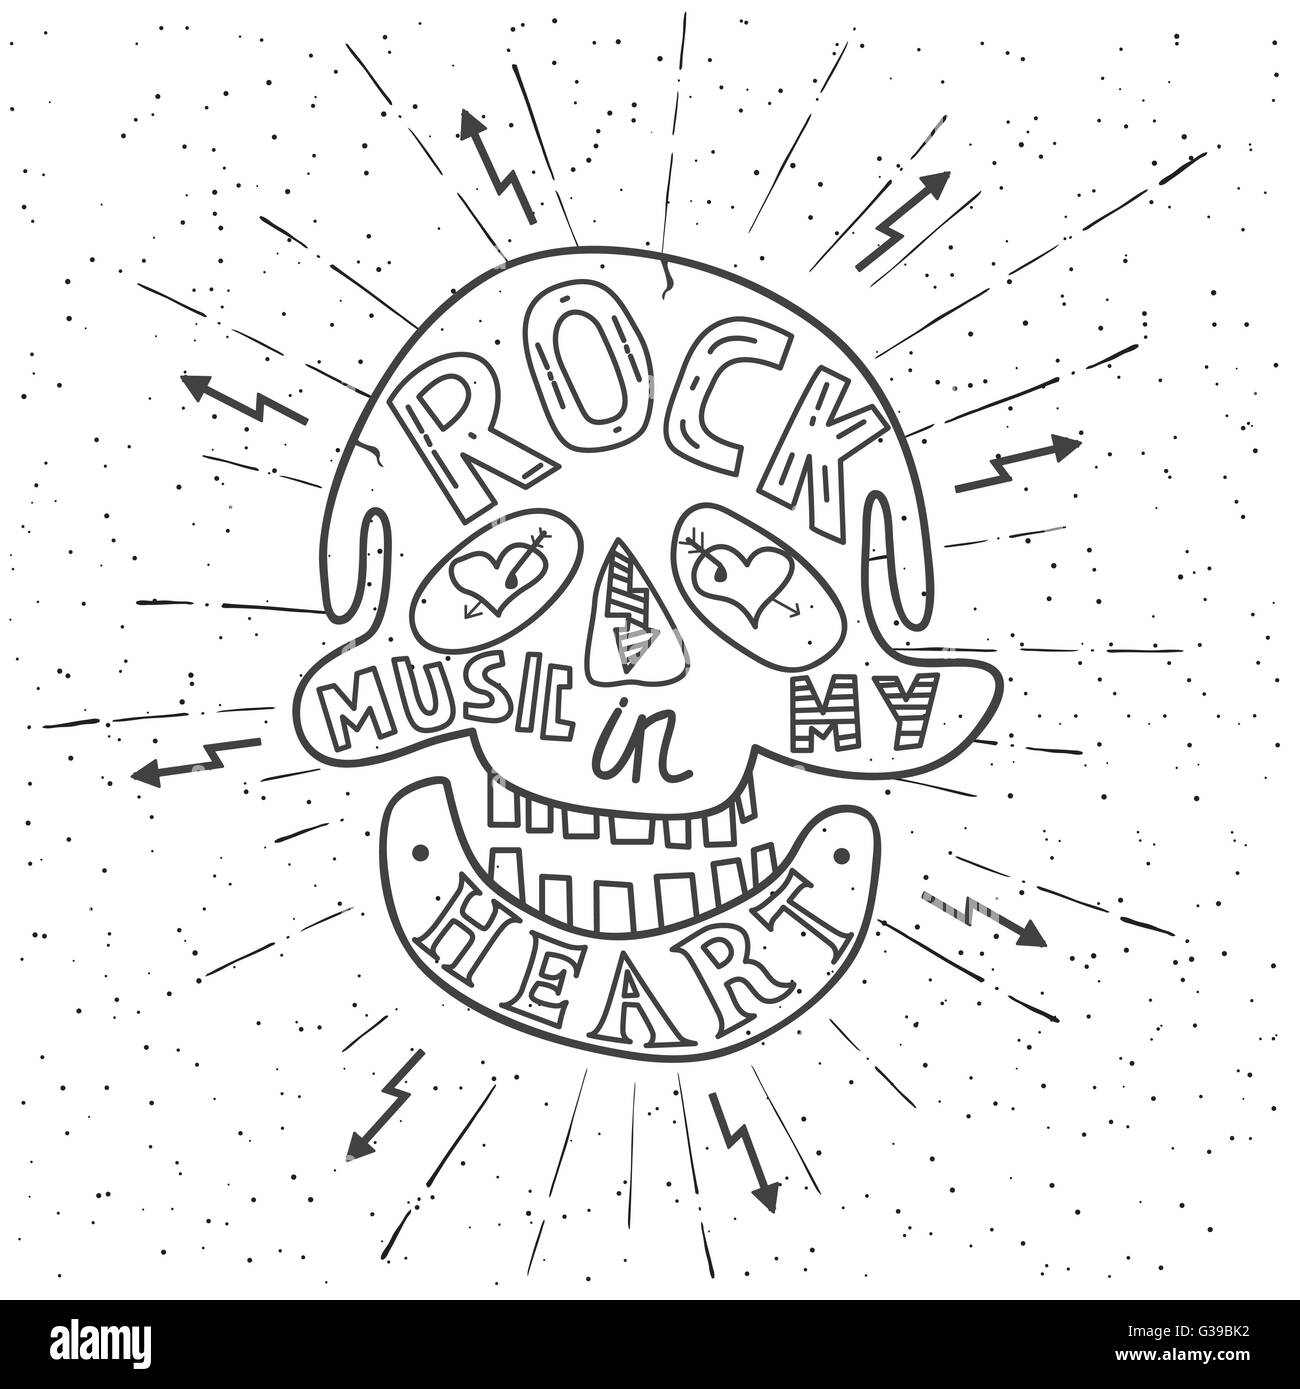 Rock music in my heart. Hand drawn lettering design with skull. Typography concept for t-shirt design or web site. Vector Stock Vector